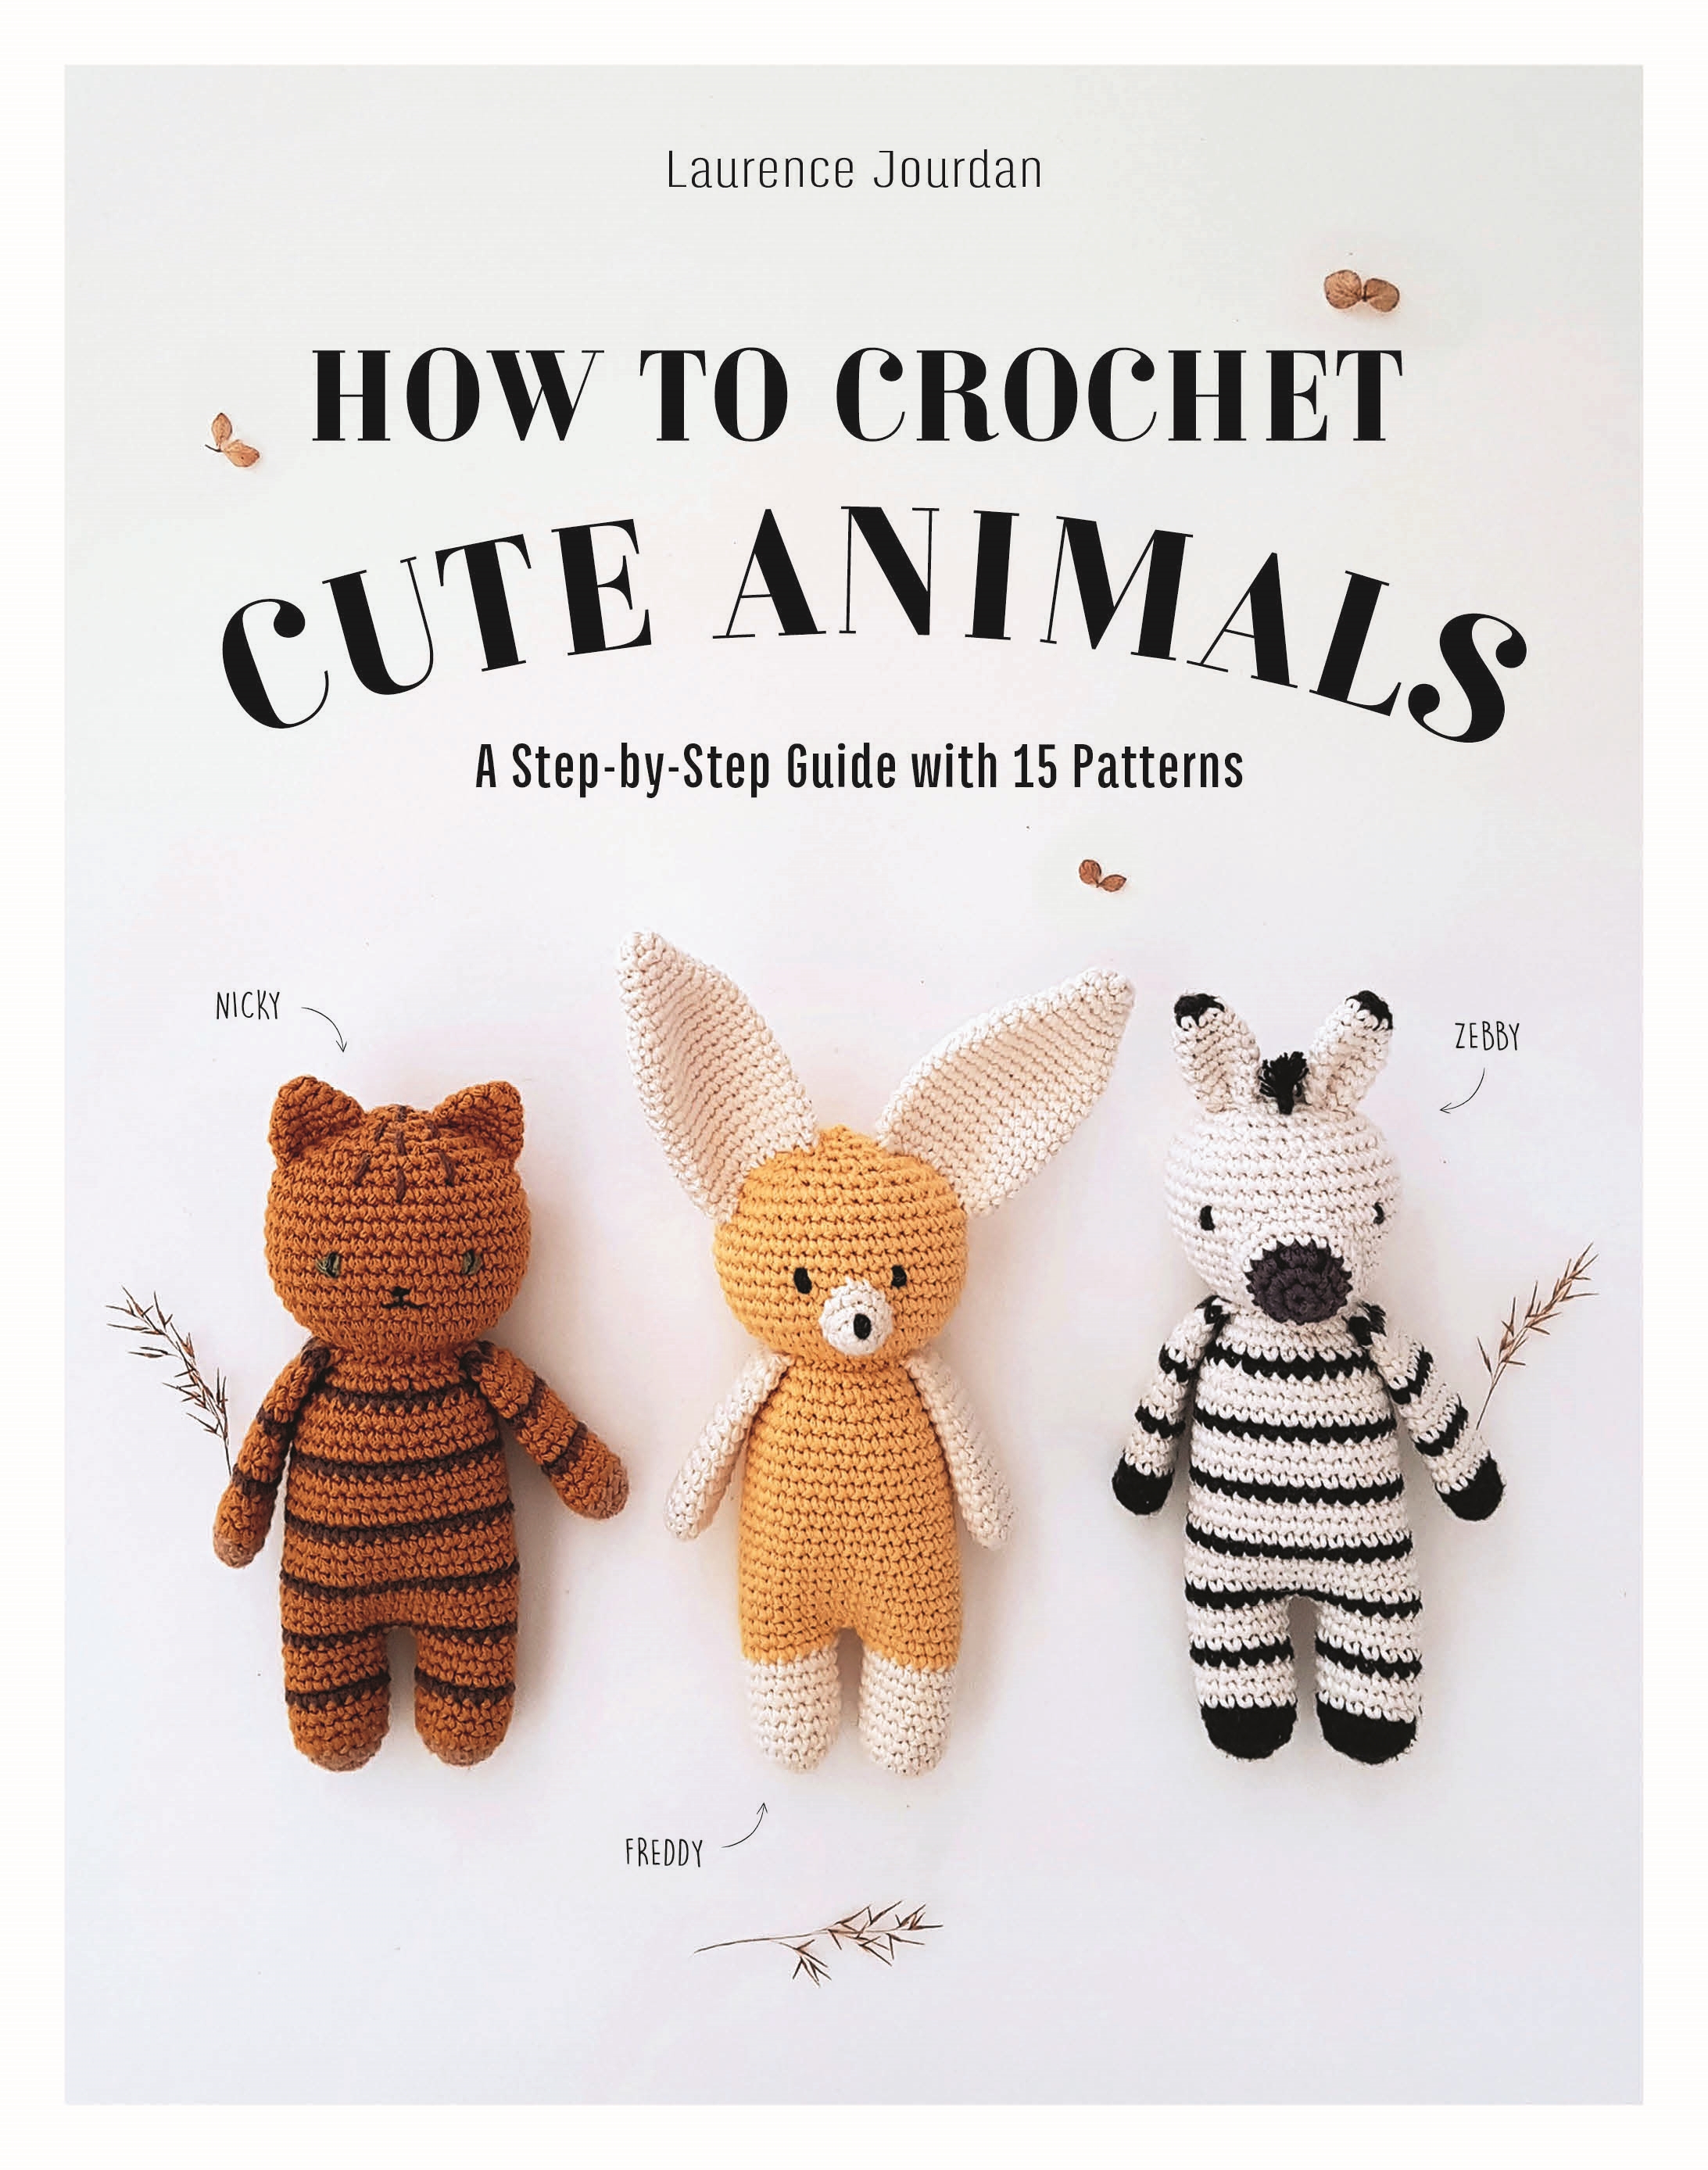 How to Crochet Cute Animals